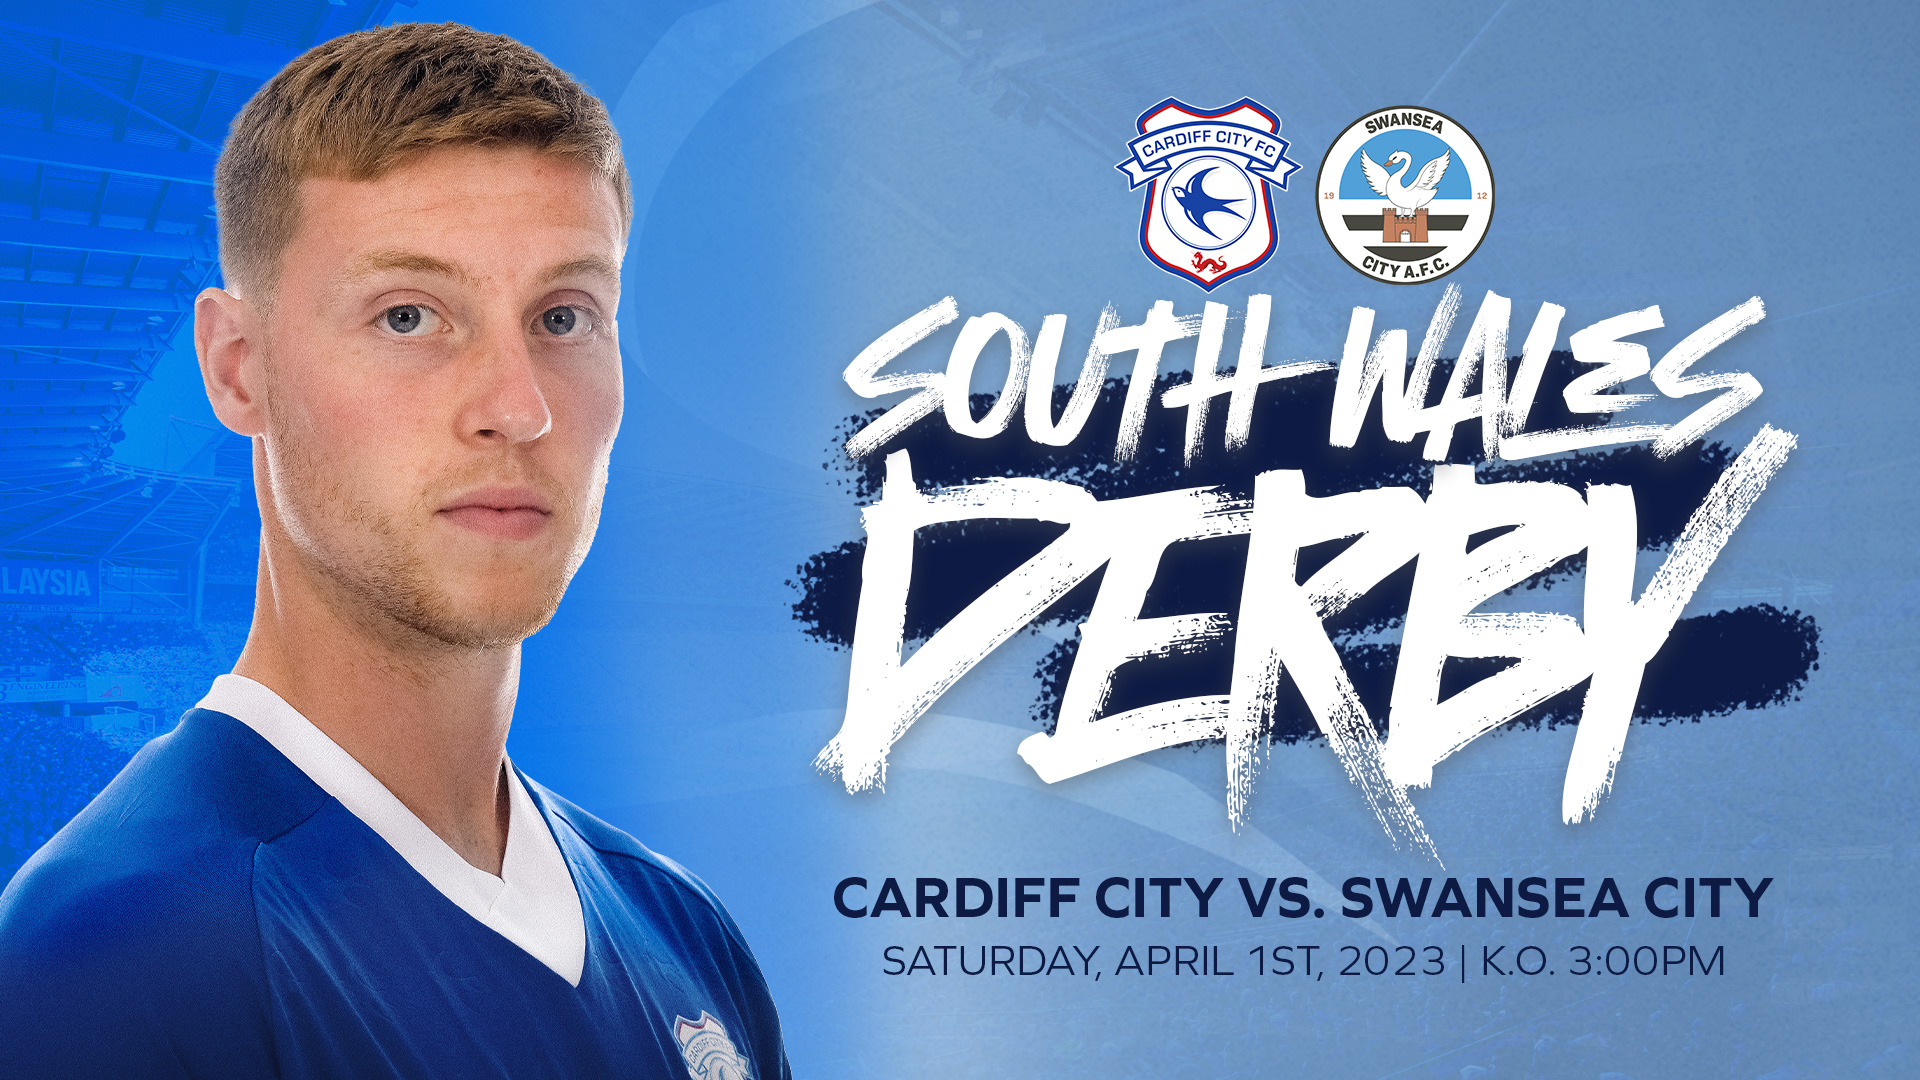 Cardiff City club information - Wales Online